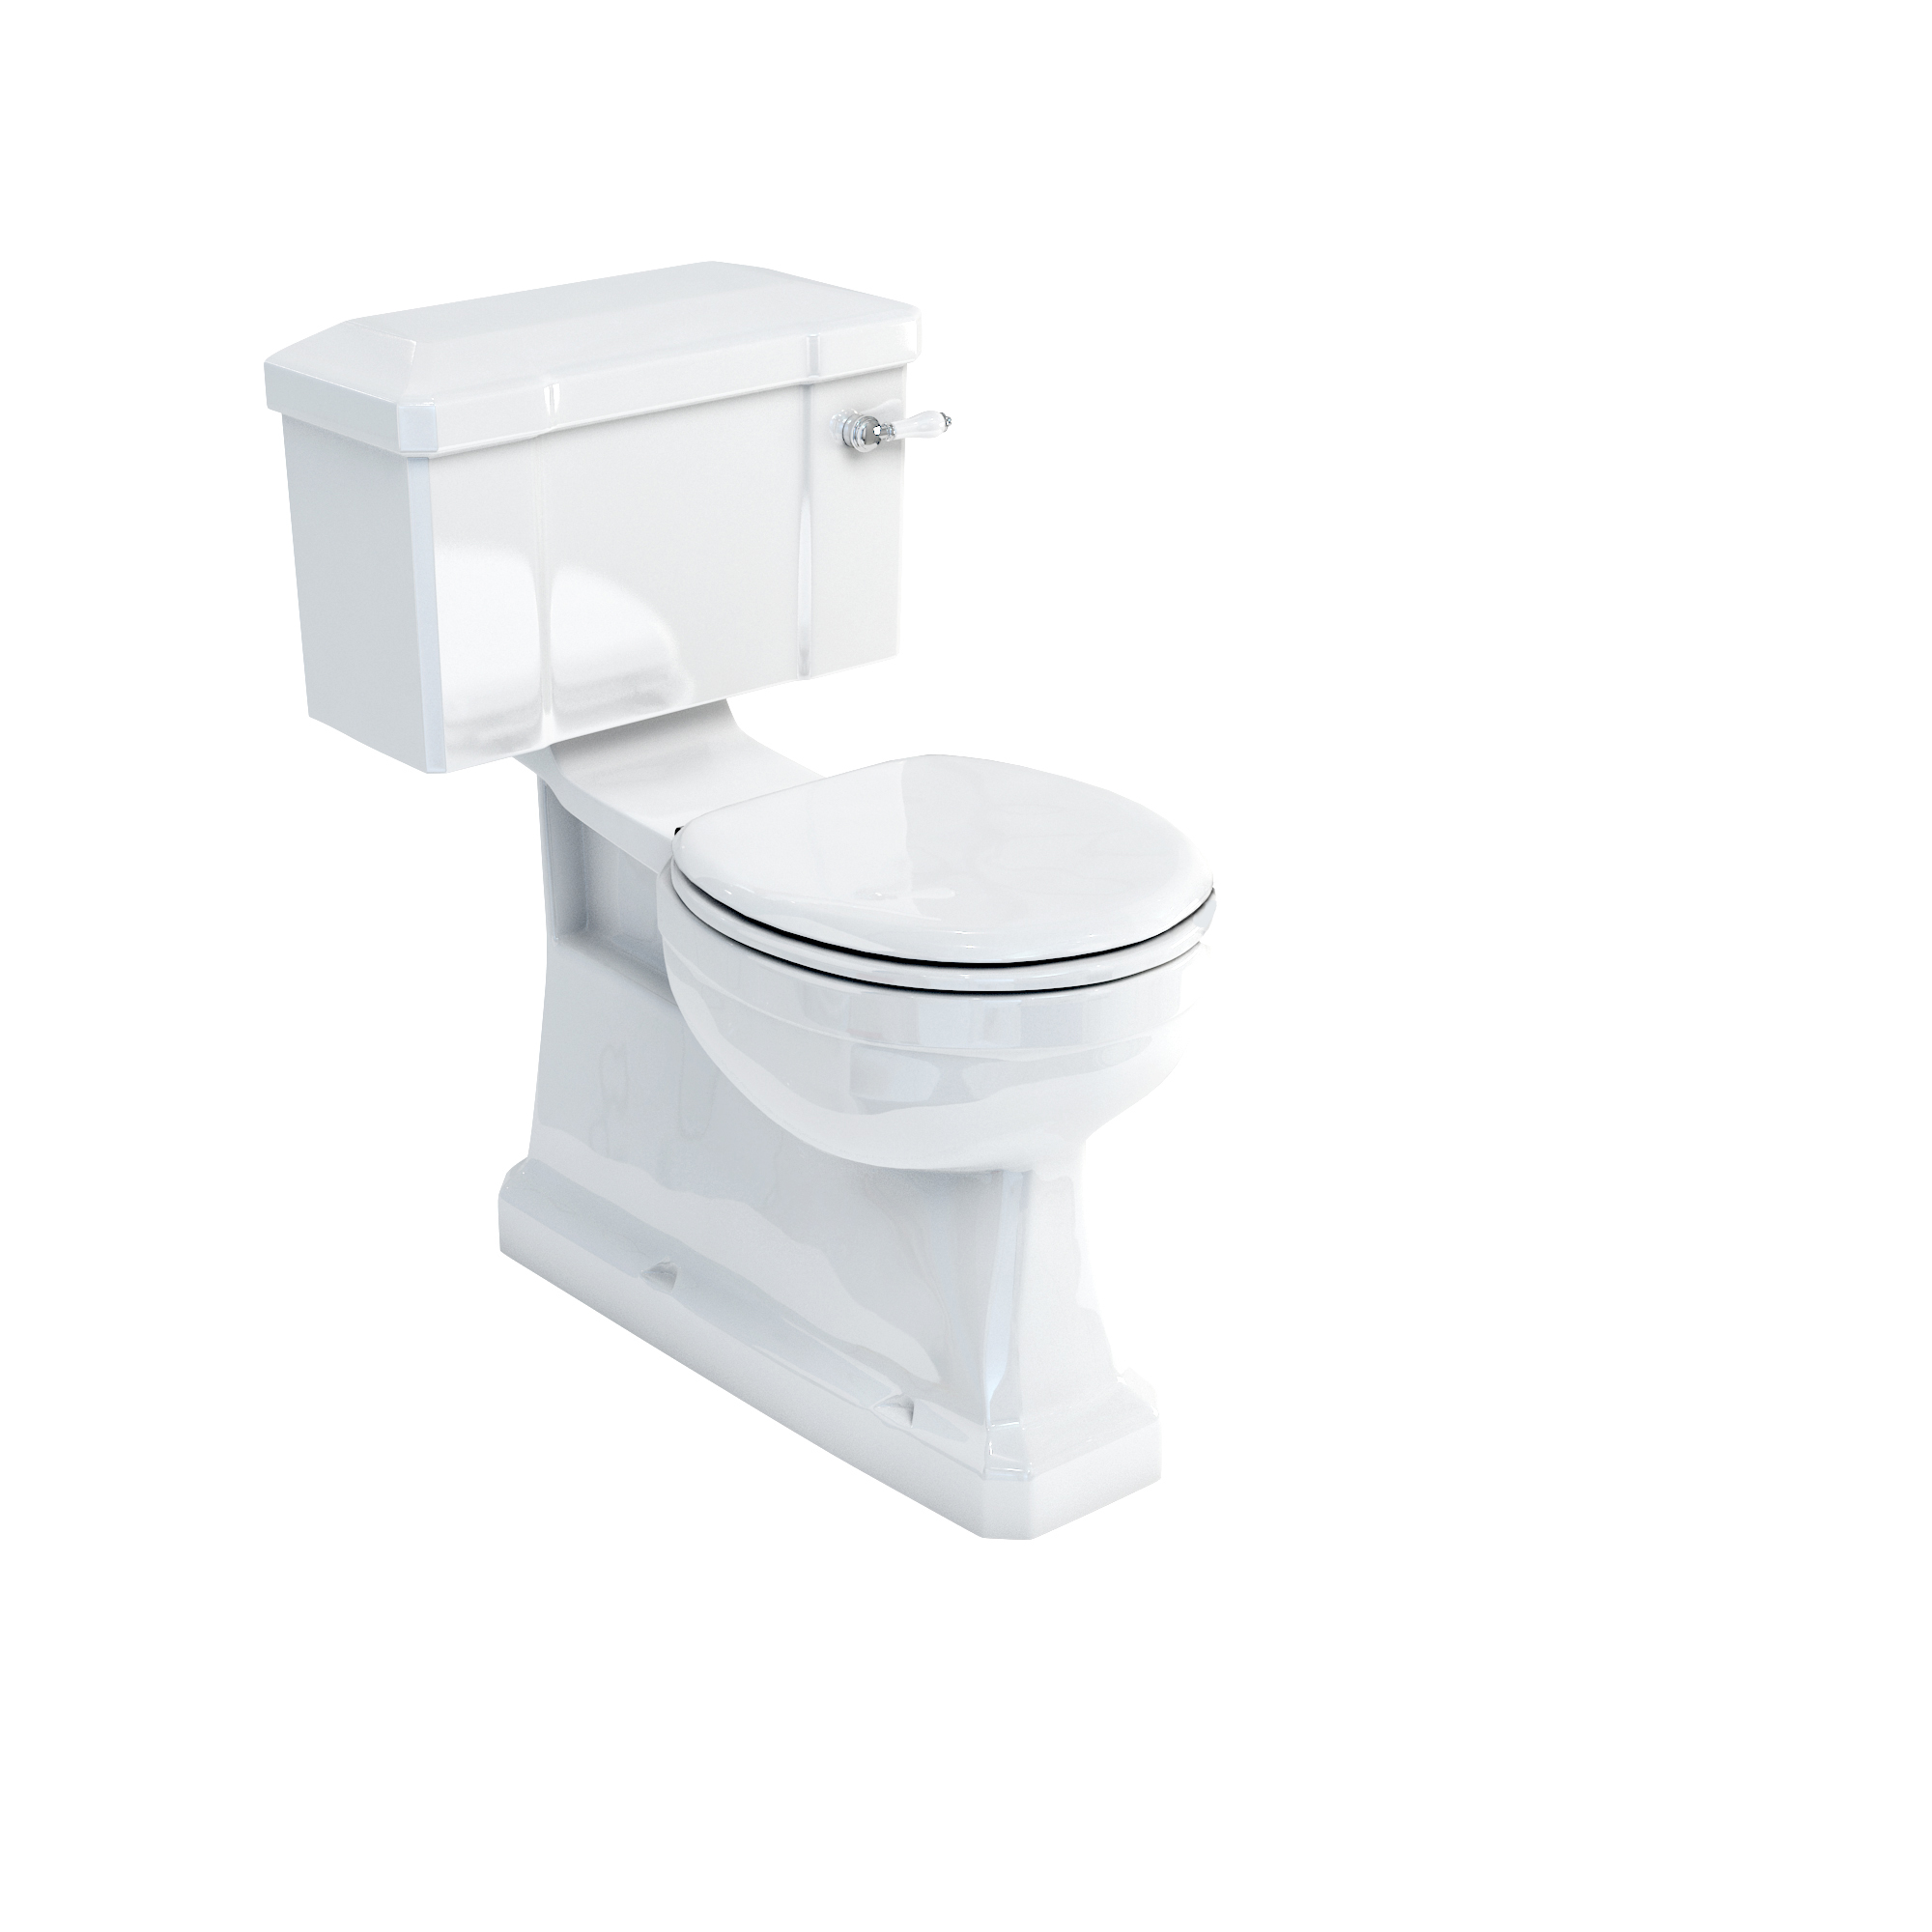 S trap CC WC with 520 rear entry lever cistern